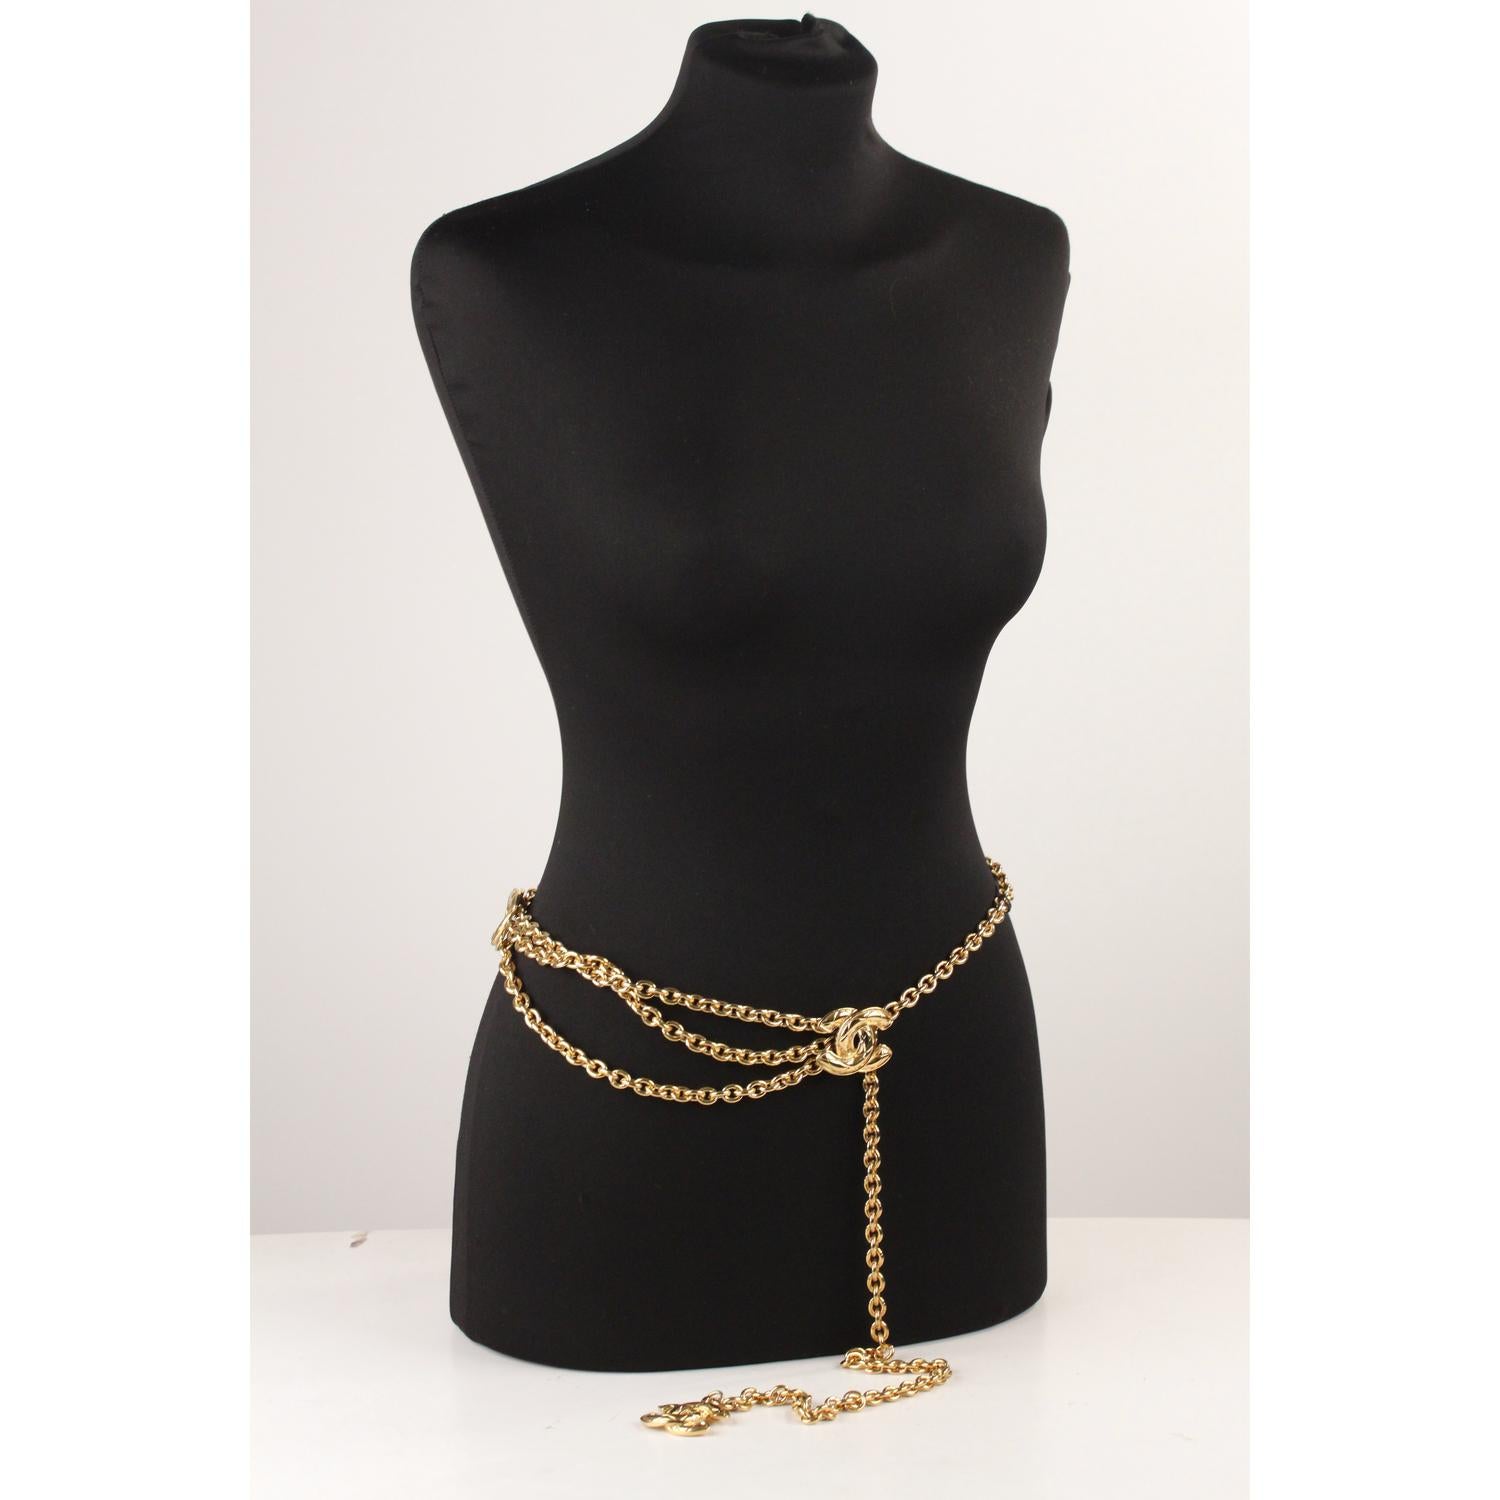 Chanel Vintage Gold Metal Chain Necklace or Belt with CC Logos 2